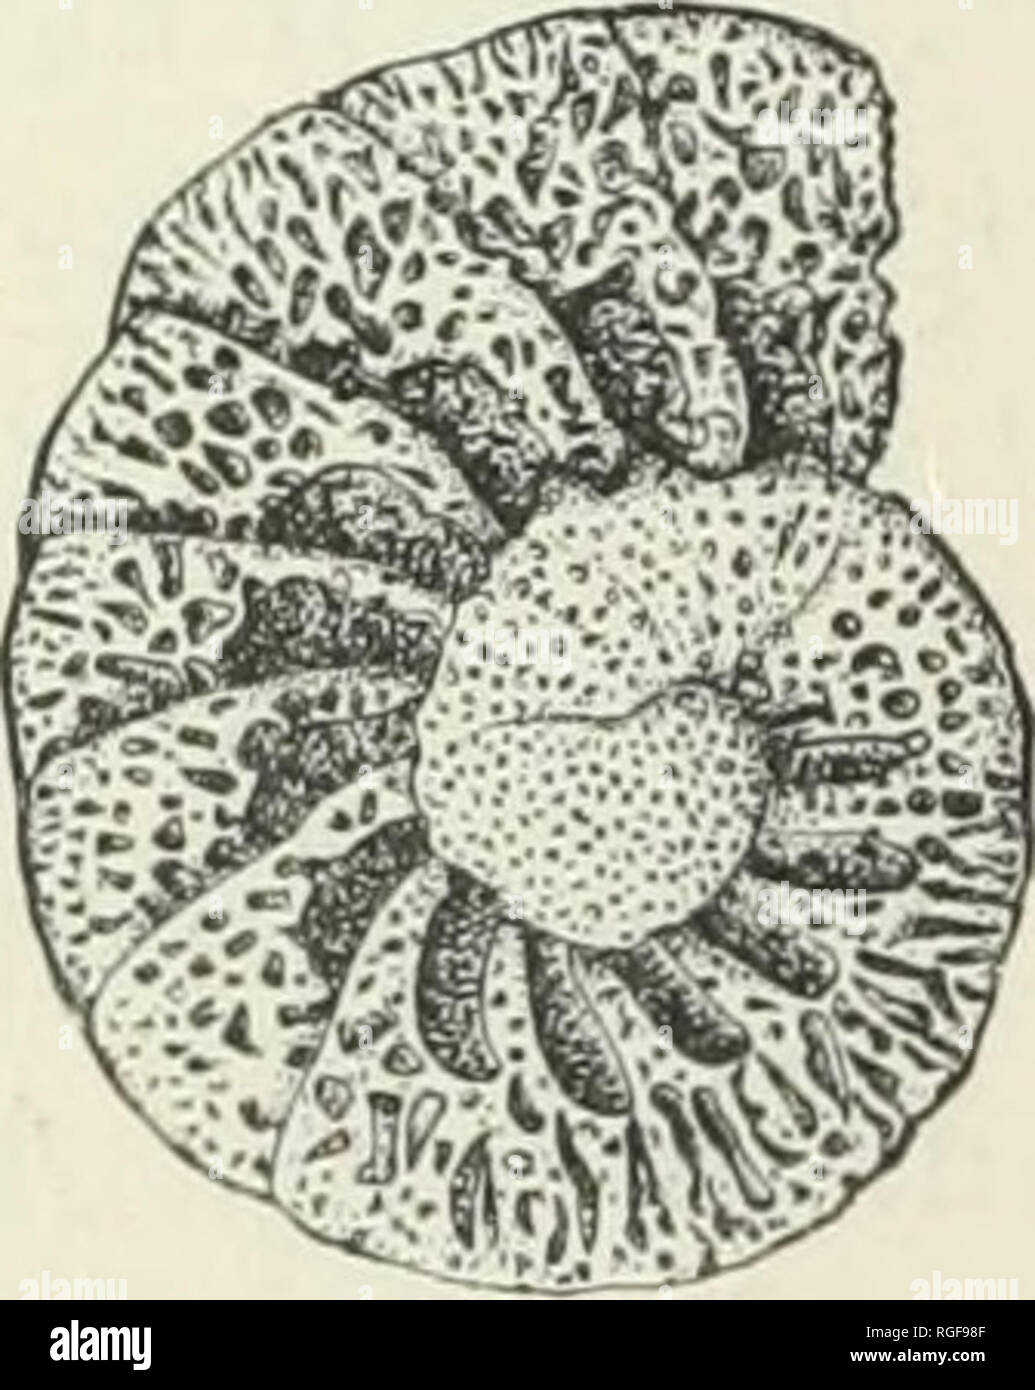 . Bulletin of the Museum of Comparative Zoology at Harvard College. Zoology; Zoology. Fig. 499. Y- Cyclammina eaneellata. (Brady. Most variable in the shape and structure of their shells are the Textularime. A very common type of the group is the cosmopolitan Tex- tularia sagittula (Fig. 500), which at- tains a length of 6 mm.; it has been dredged in the Atlantic in 2,675 fath- oms. Another abundant form, which dates back to the cretaceous, is the com- pact and thick-walled T. trochus (Figs. Fig. 500. —Textularia sagit- tula.. Please note that these images are extracted from scanned page image Stock Photo